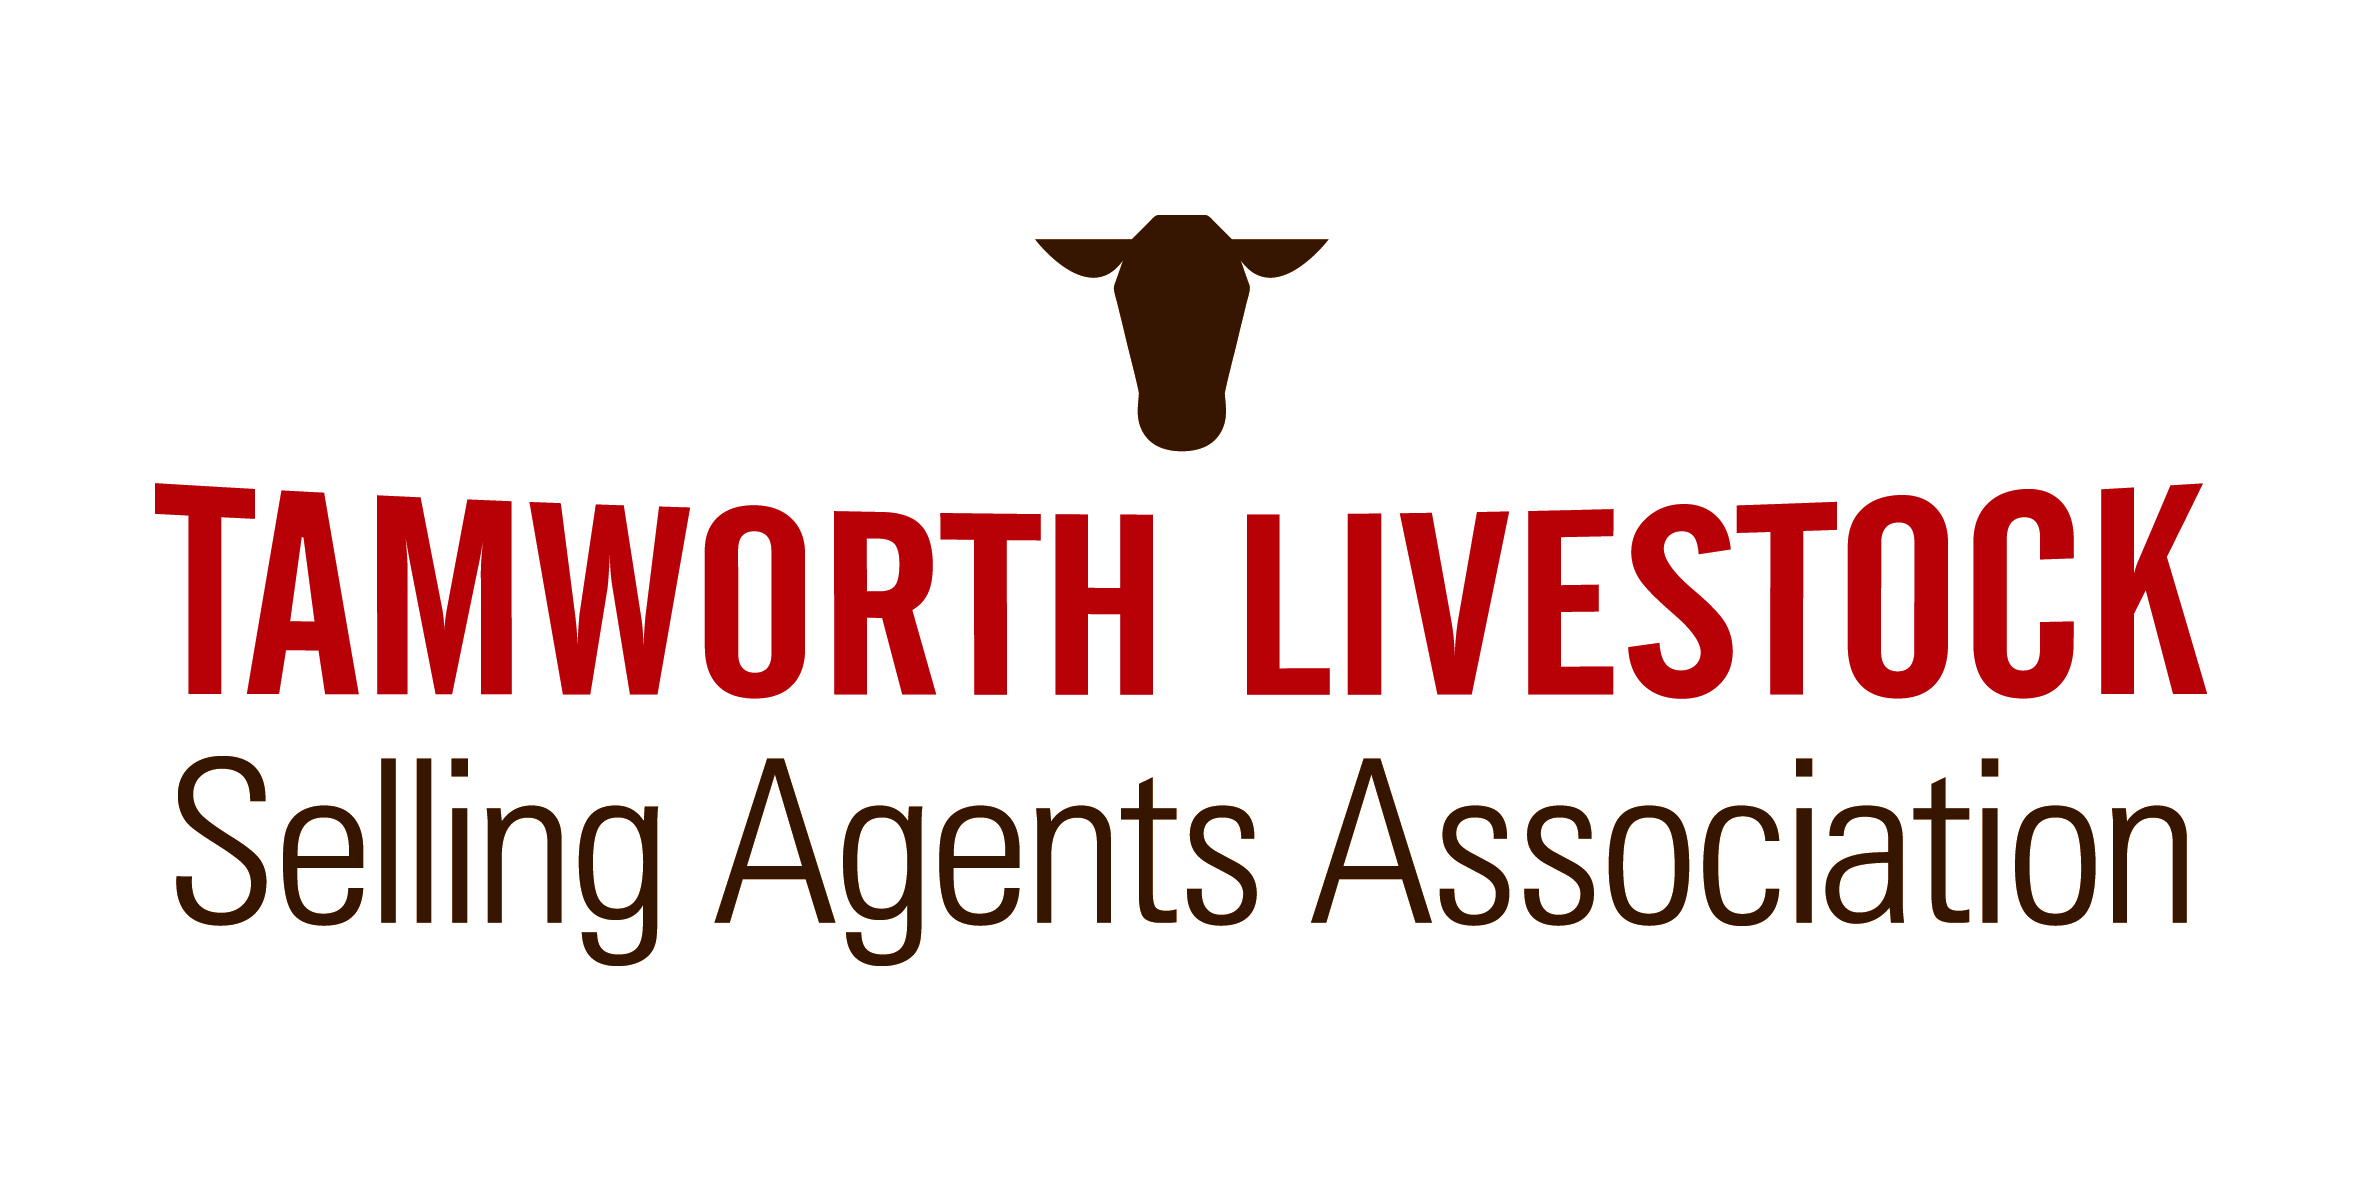 Tamworth Fortnightly Store Cattle Sale